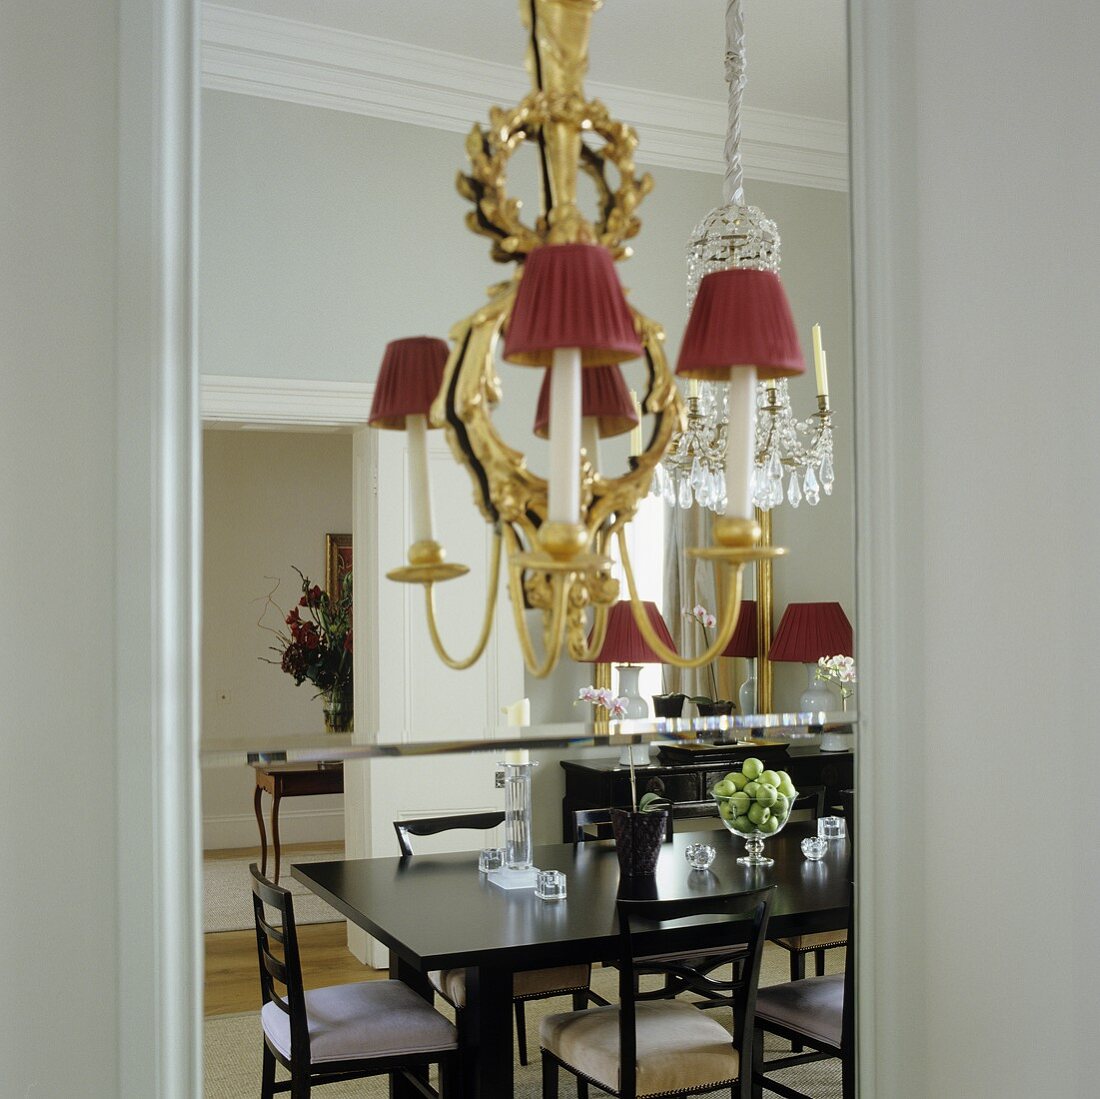 A brass chandelier with red shades mounted on a mirror in which a black dining and chairs are reflected